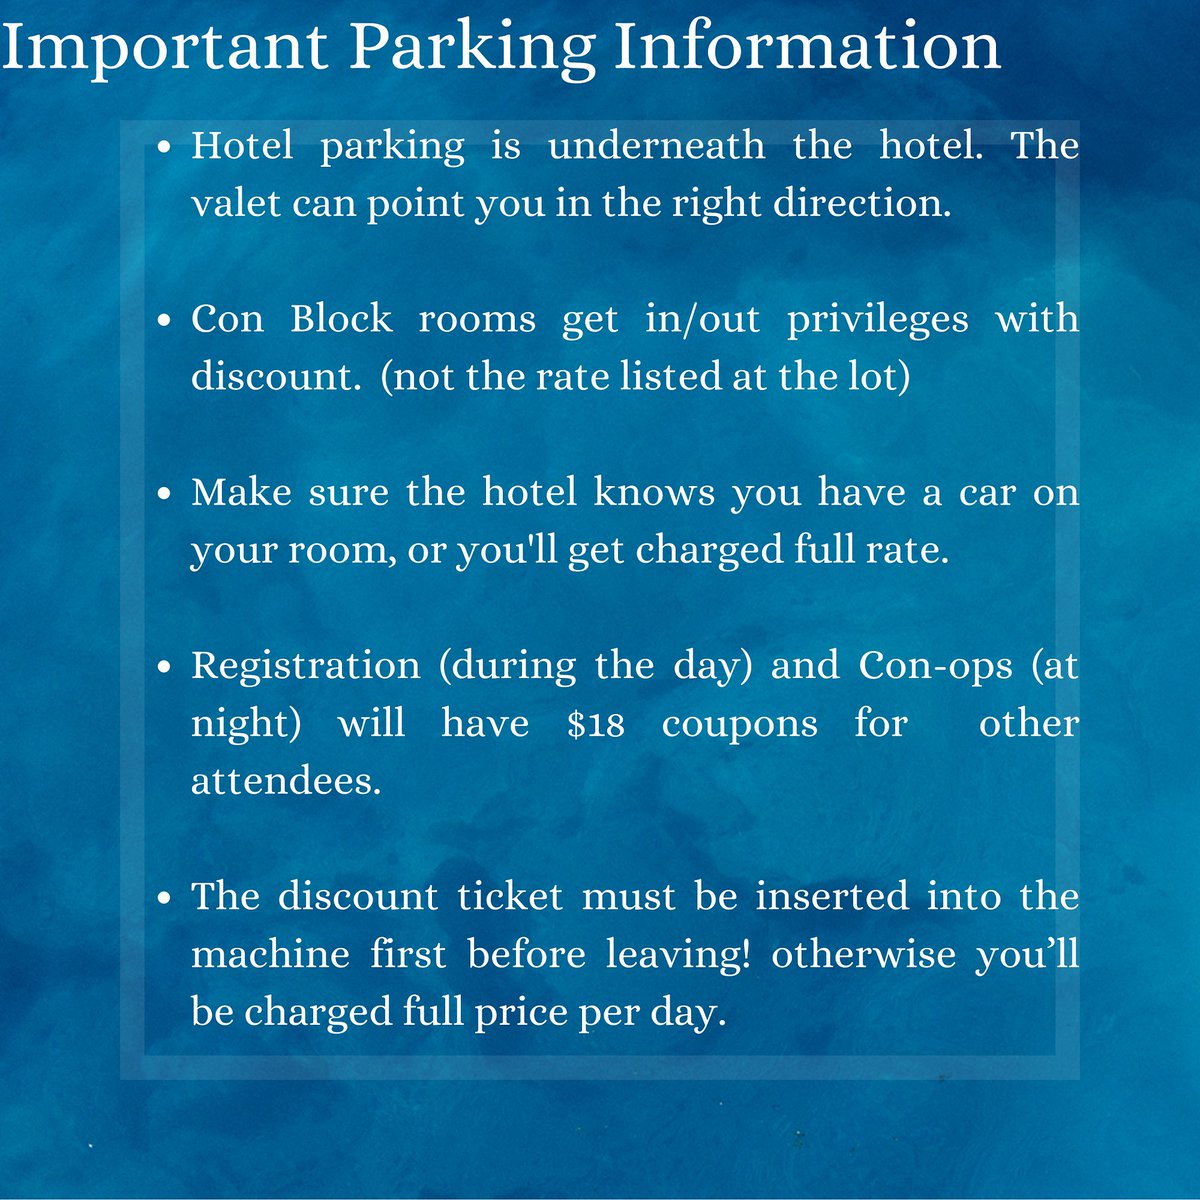 3 days until opening Ceremonies
2 days until Registration opens.

Hey Travelers, we are getting lots of questions in the telegram chats and in emails to the con. here is a little guide for hotel parking. The Discount is $18 for guests in the room block.

#GSFC2023 #hotelparking